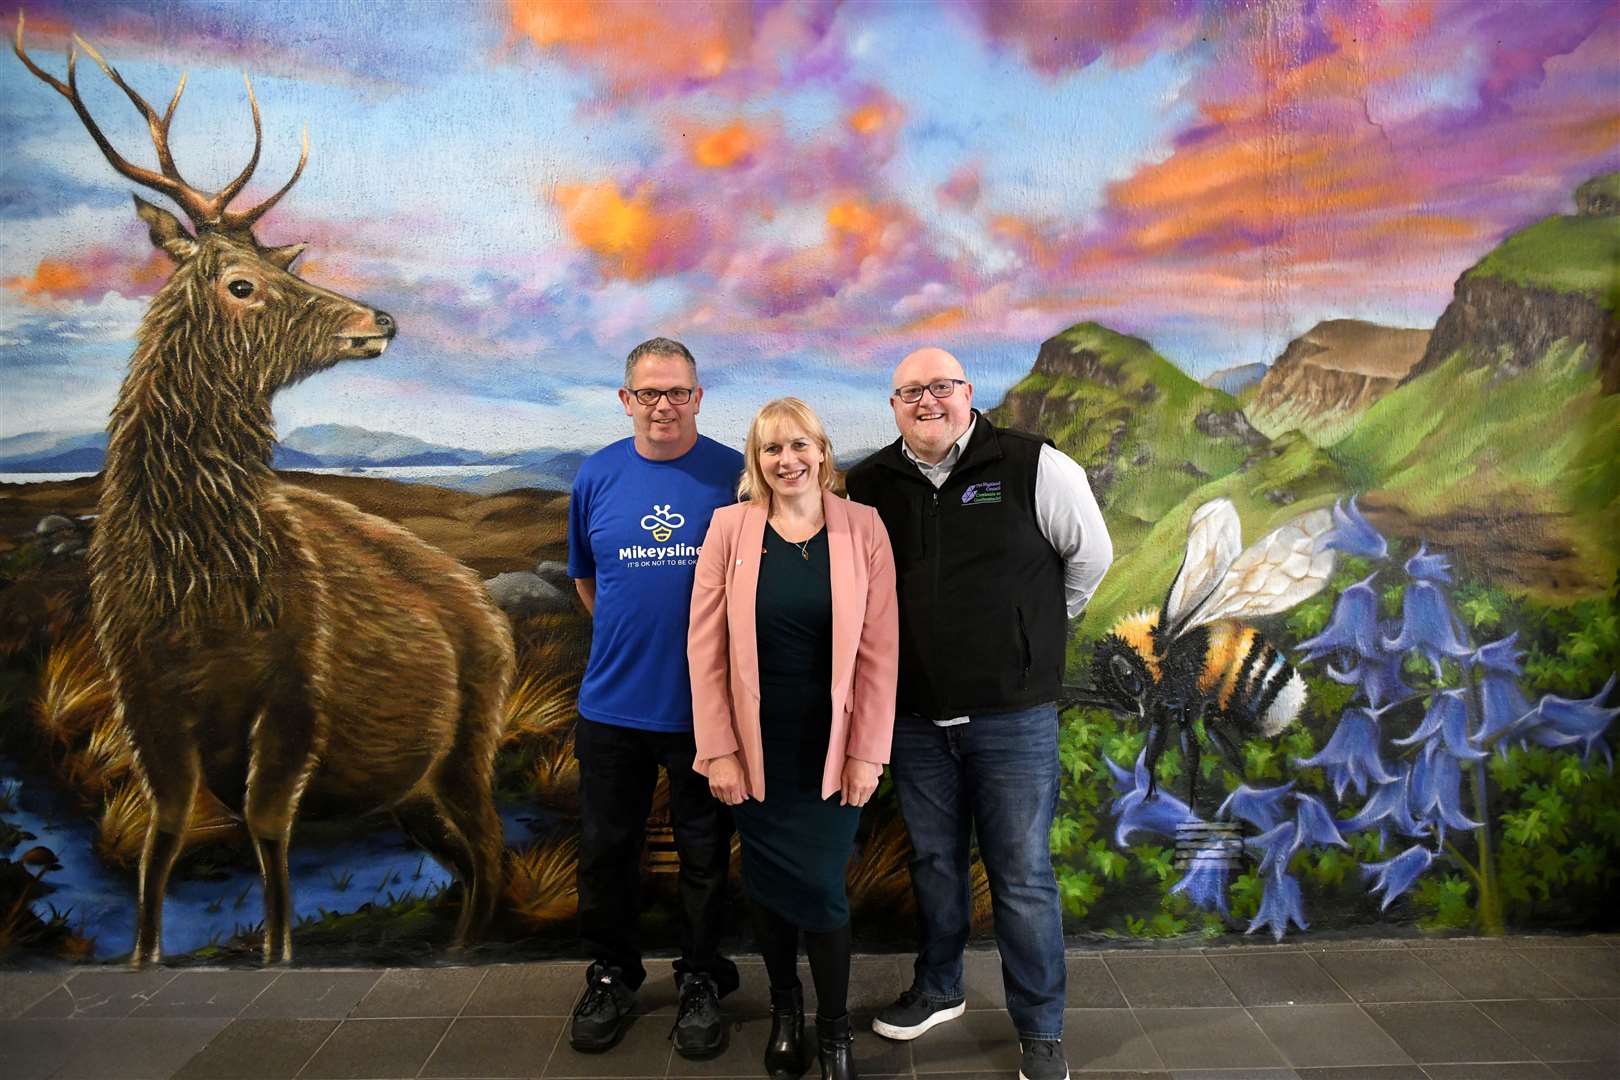 Market assistant Donald Hunter, Emily Stokes, chief executive of Mikeysline, and Cameron Macfarlane, acting manager of the Victorian Market admire the new mural. Picture: James Mackenzie.